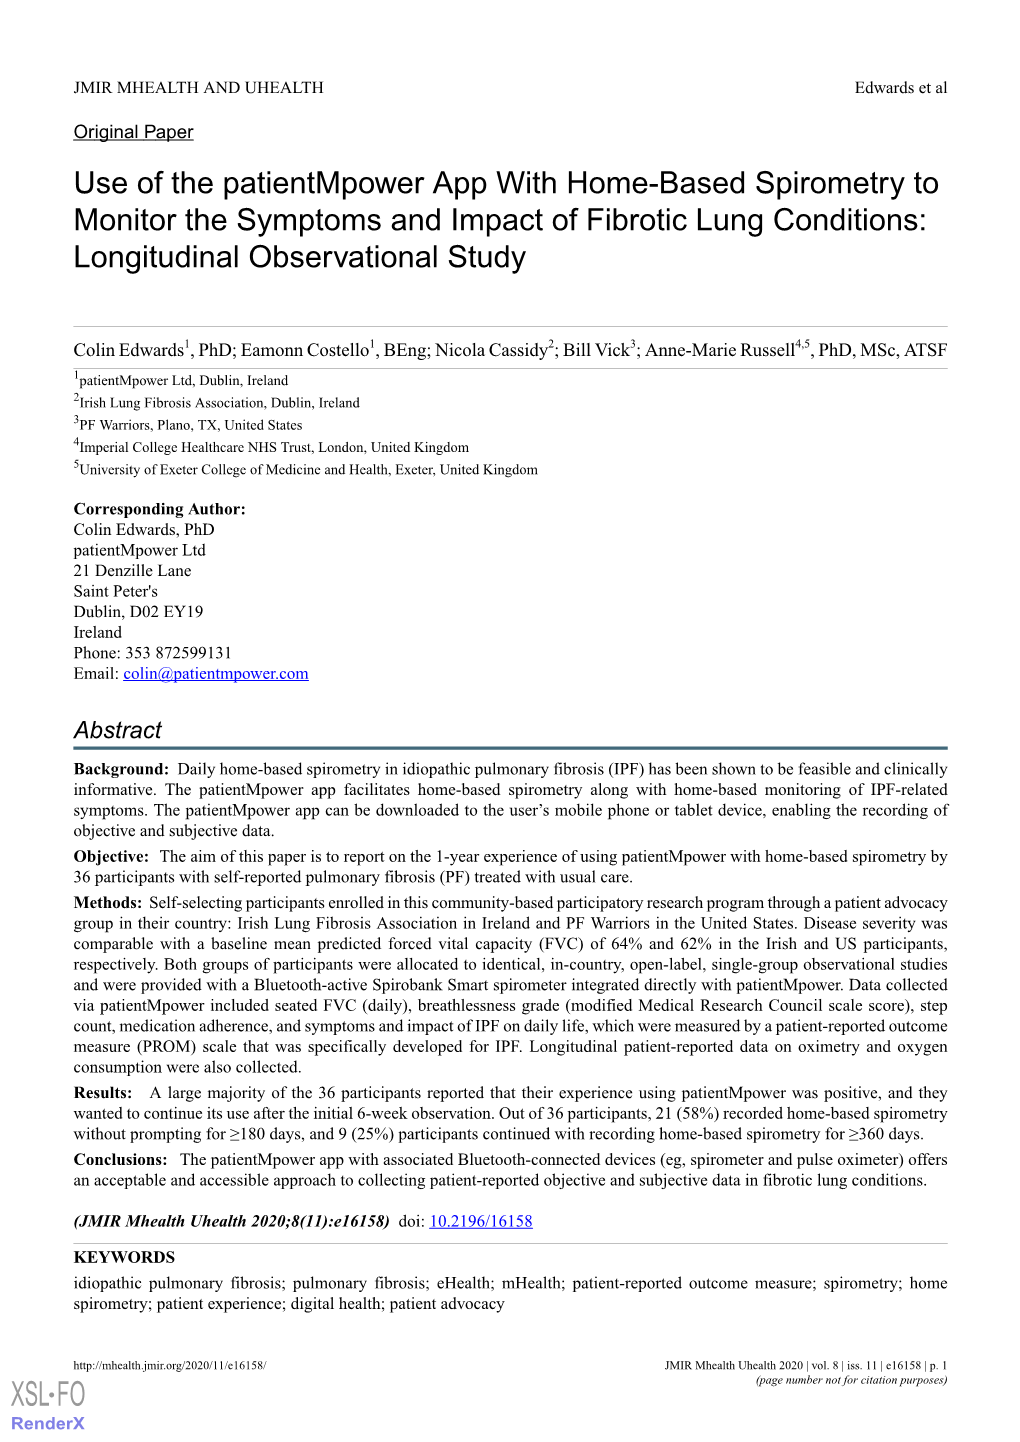 Use of the Patientmpower App with Home-Based Spirometry to Monitor the Symptoms and Impact of Fibrotic Lung Conditions: Longitudinal Observational Study